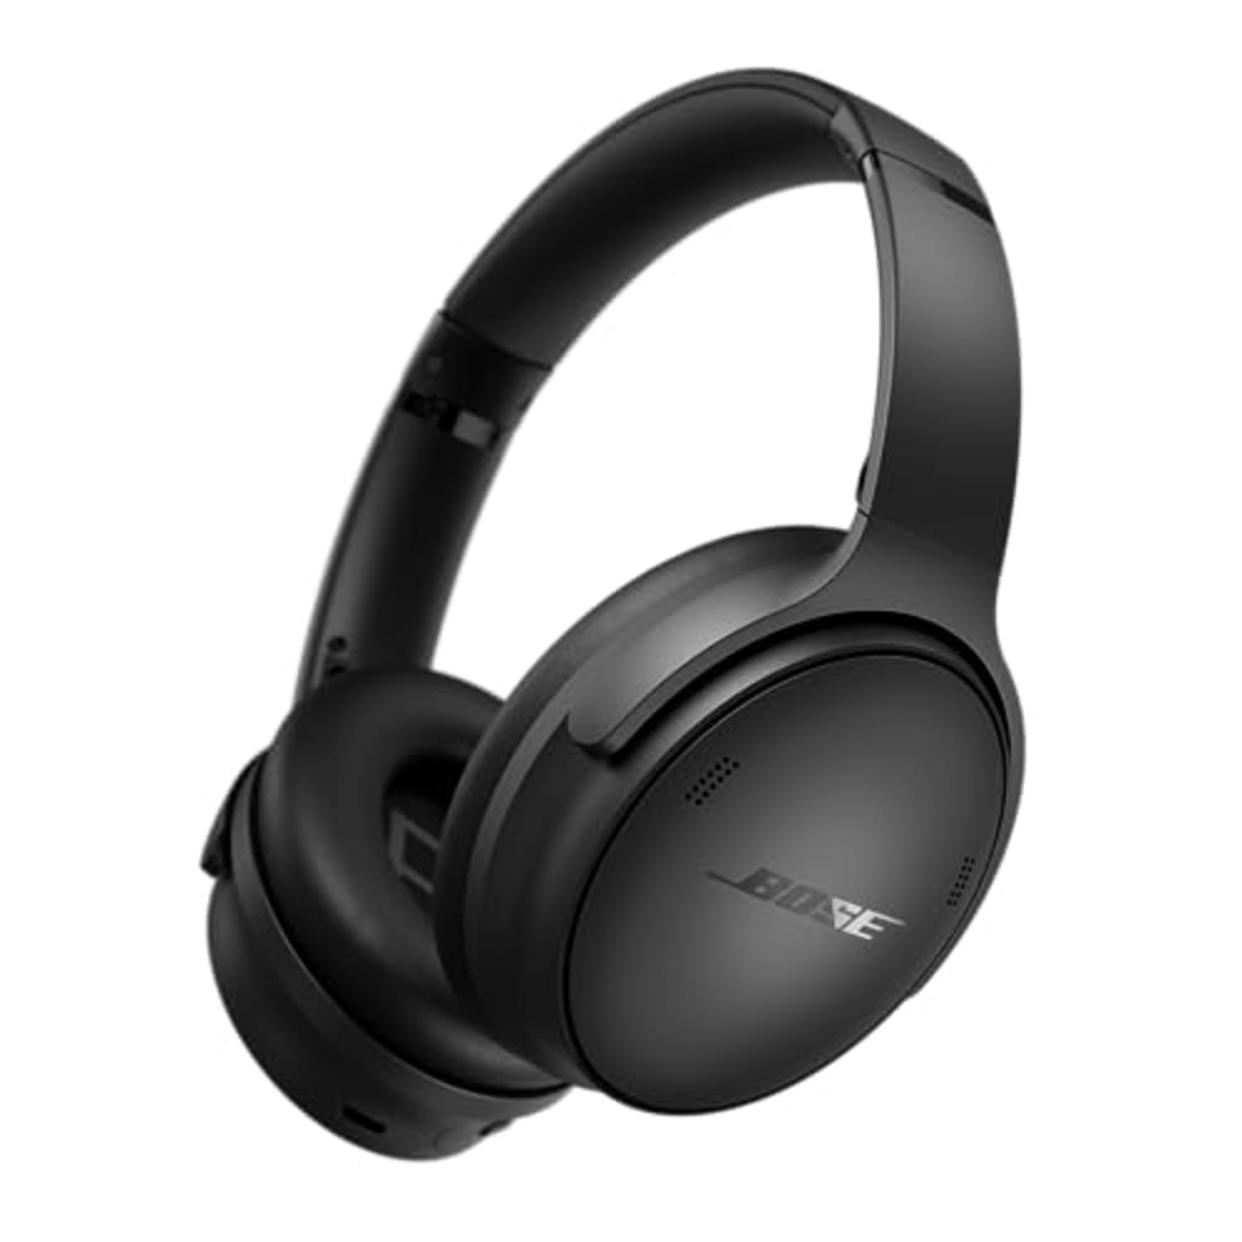 NEW Bose QuietComfort Wireless Noise Cancelling Headphones, Bluetooth Over Ear Headphones with Up To 24 Hours of Battery Life, Black (AMAZON)